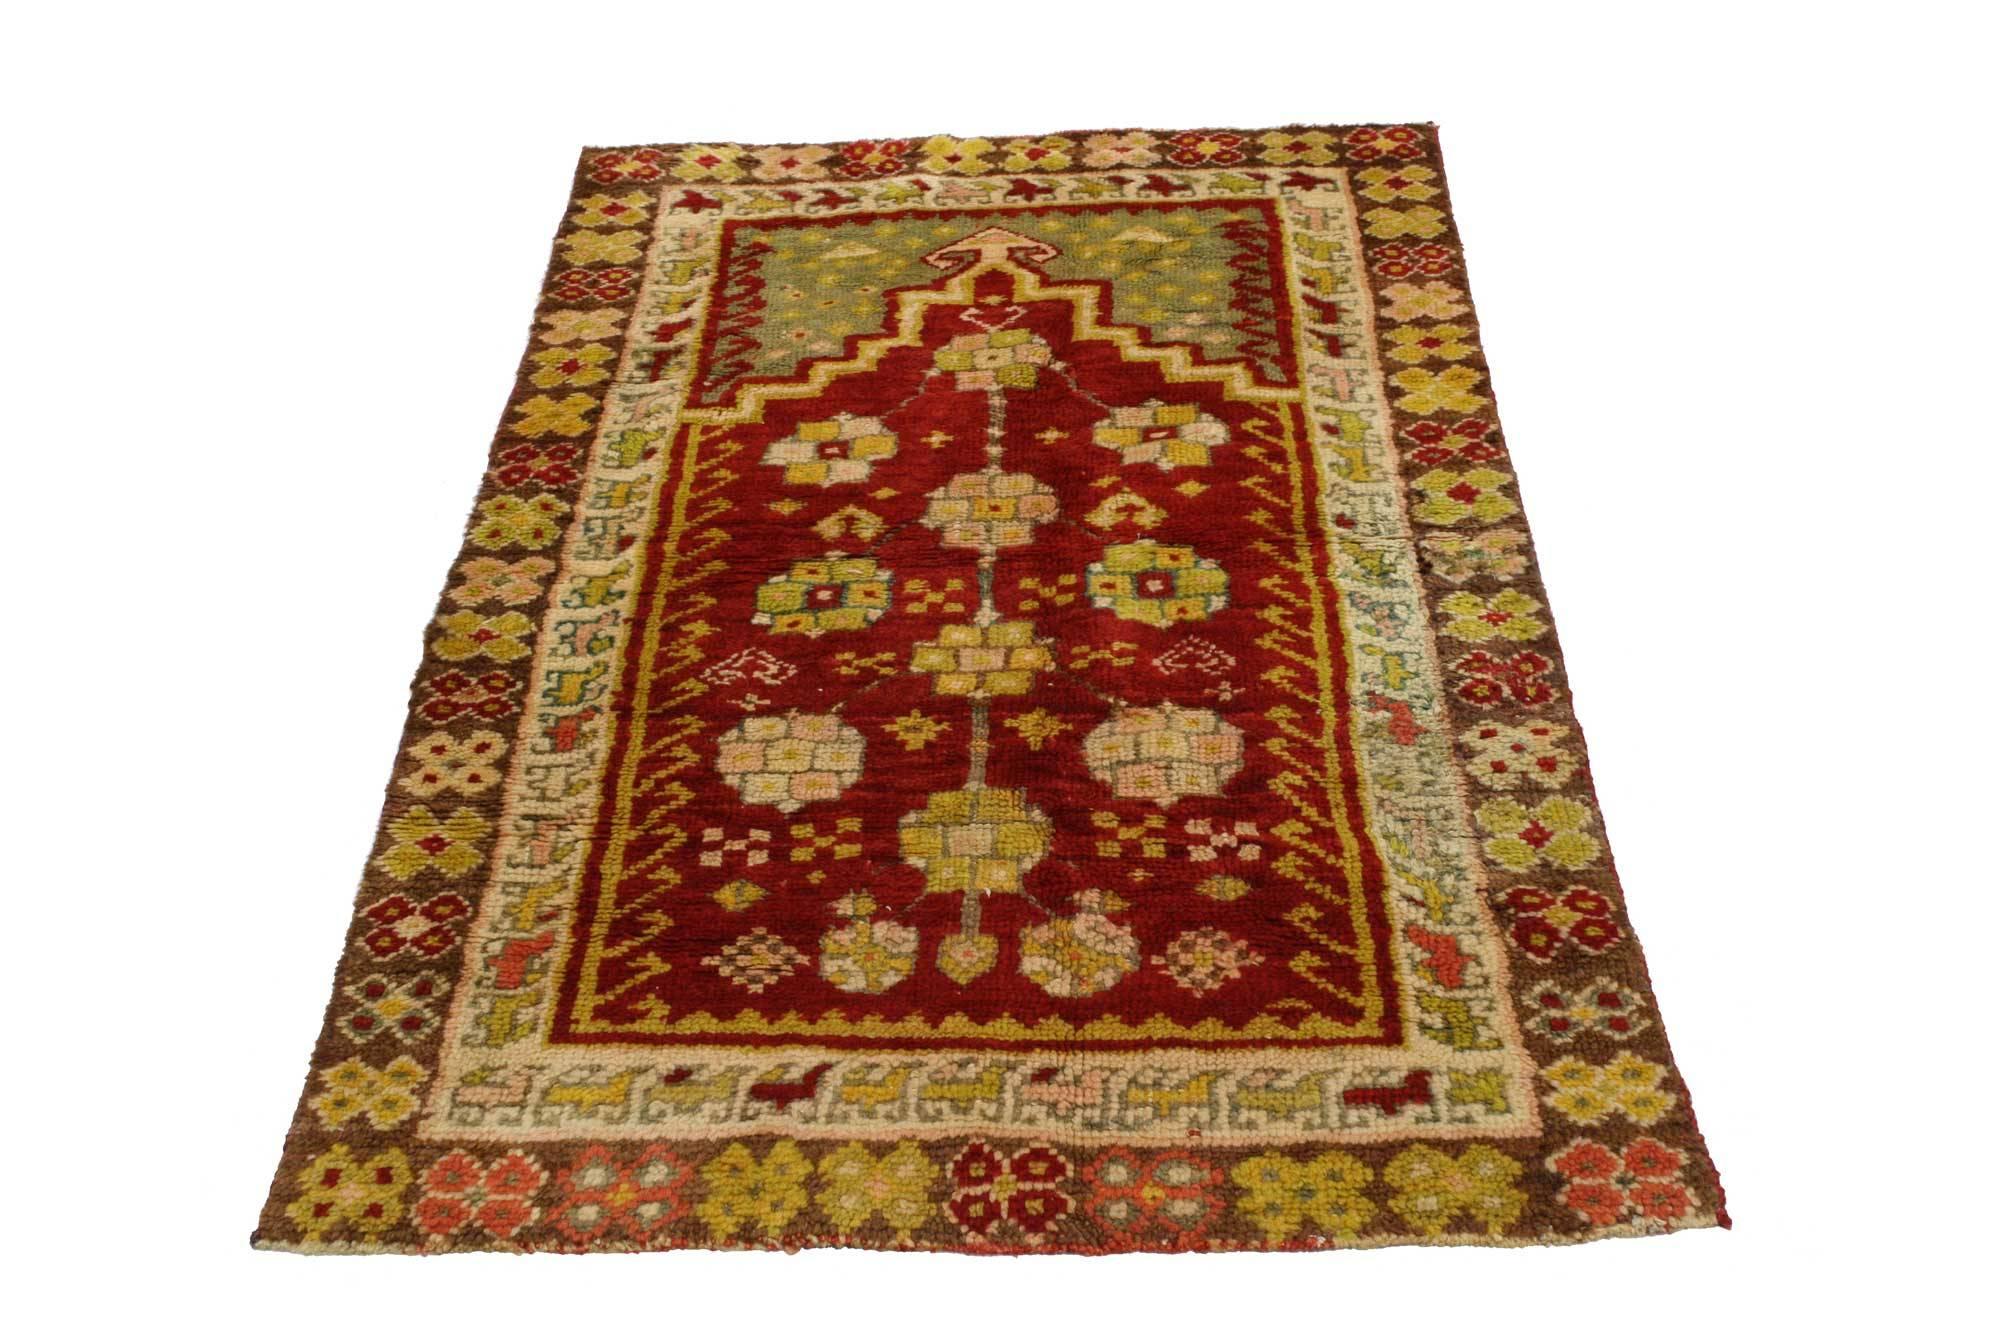 51686, vintage Turkish Oushak prayer rug. This captivating vintage Turkish Oushak prayer rug features the motif of a stepped edge mihrab, or prayer niche, topped with an arrow head finial. Multi-color blossoms fill the carpet field meanwhile